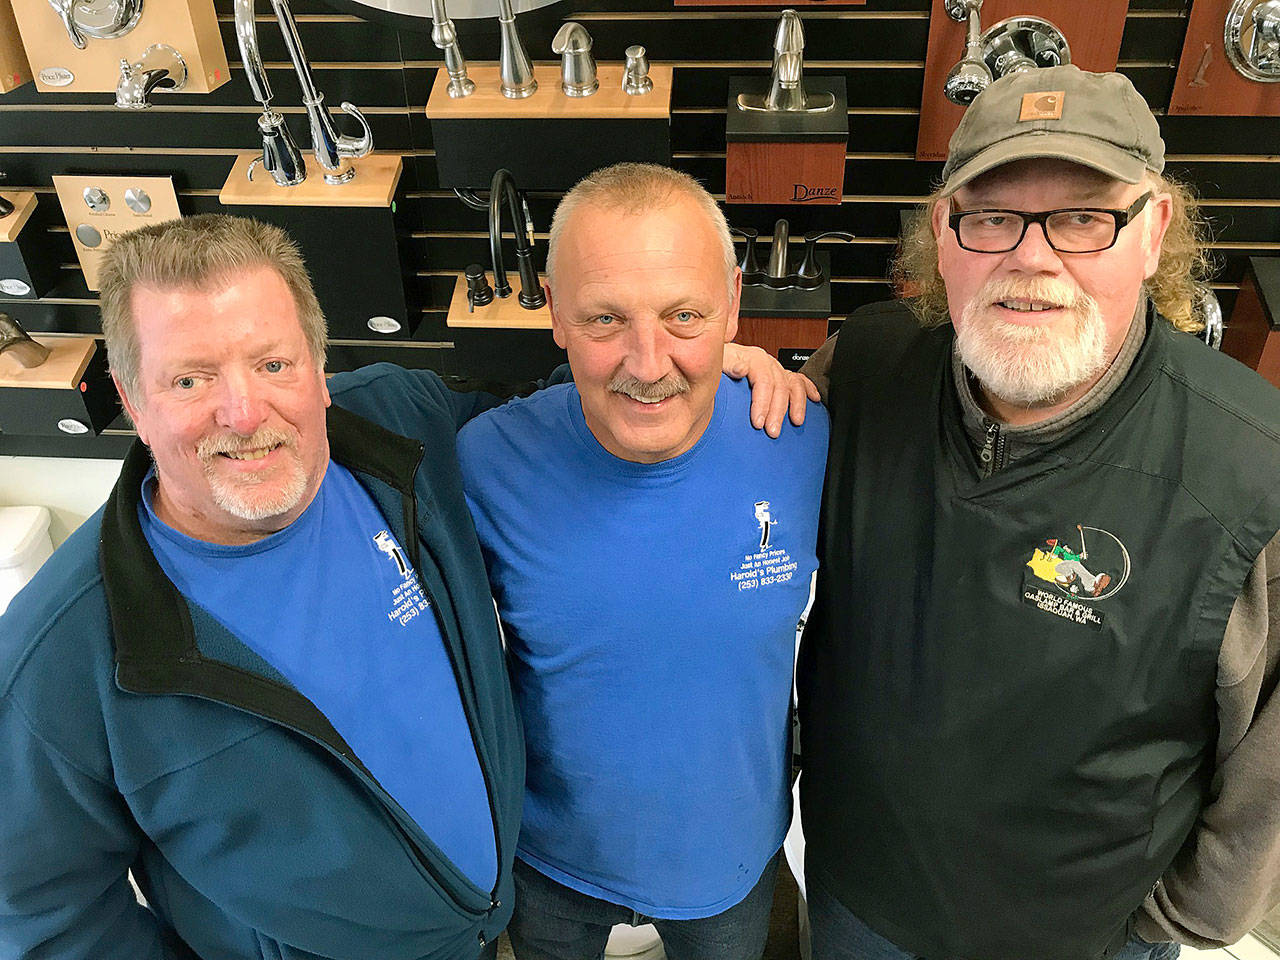 Three Musketeers: Curt Gilbert, middle, and his sidekicks, Dean Fitzsimmons, left, and Scott Armstrong have enjoyed a long, working friendship at Harold’s Plumbing, their comfortable “clubhouse.” MARK KLAAS, Auburn Reporter